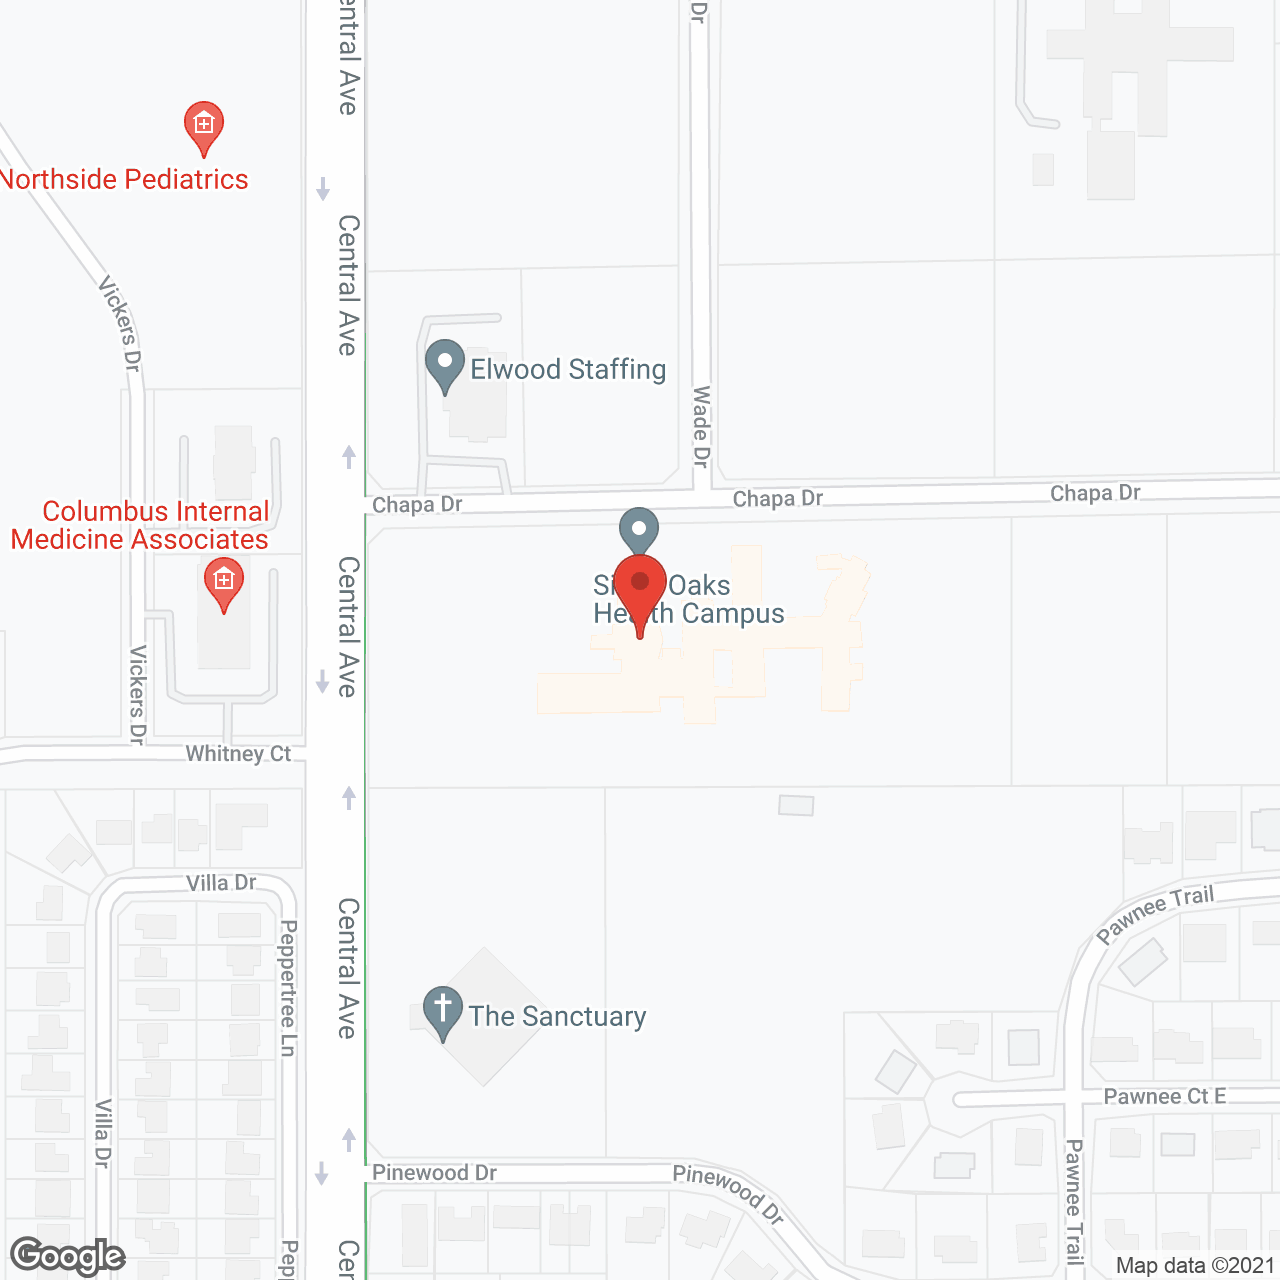 Silver Oaks Health Campus in google map